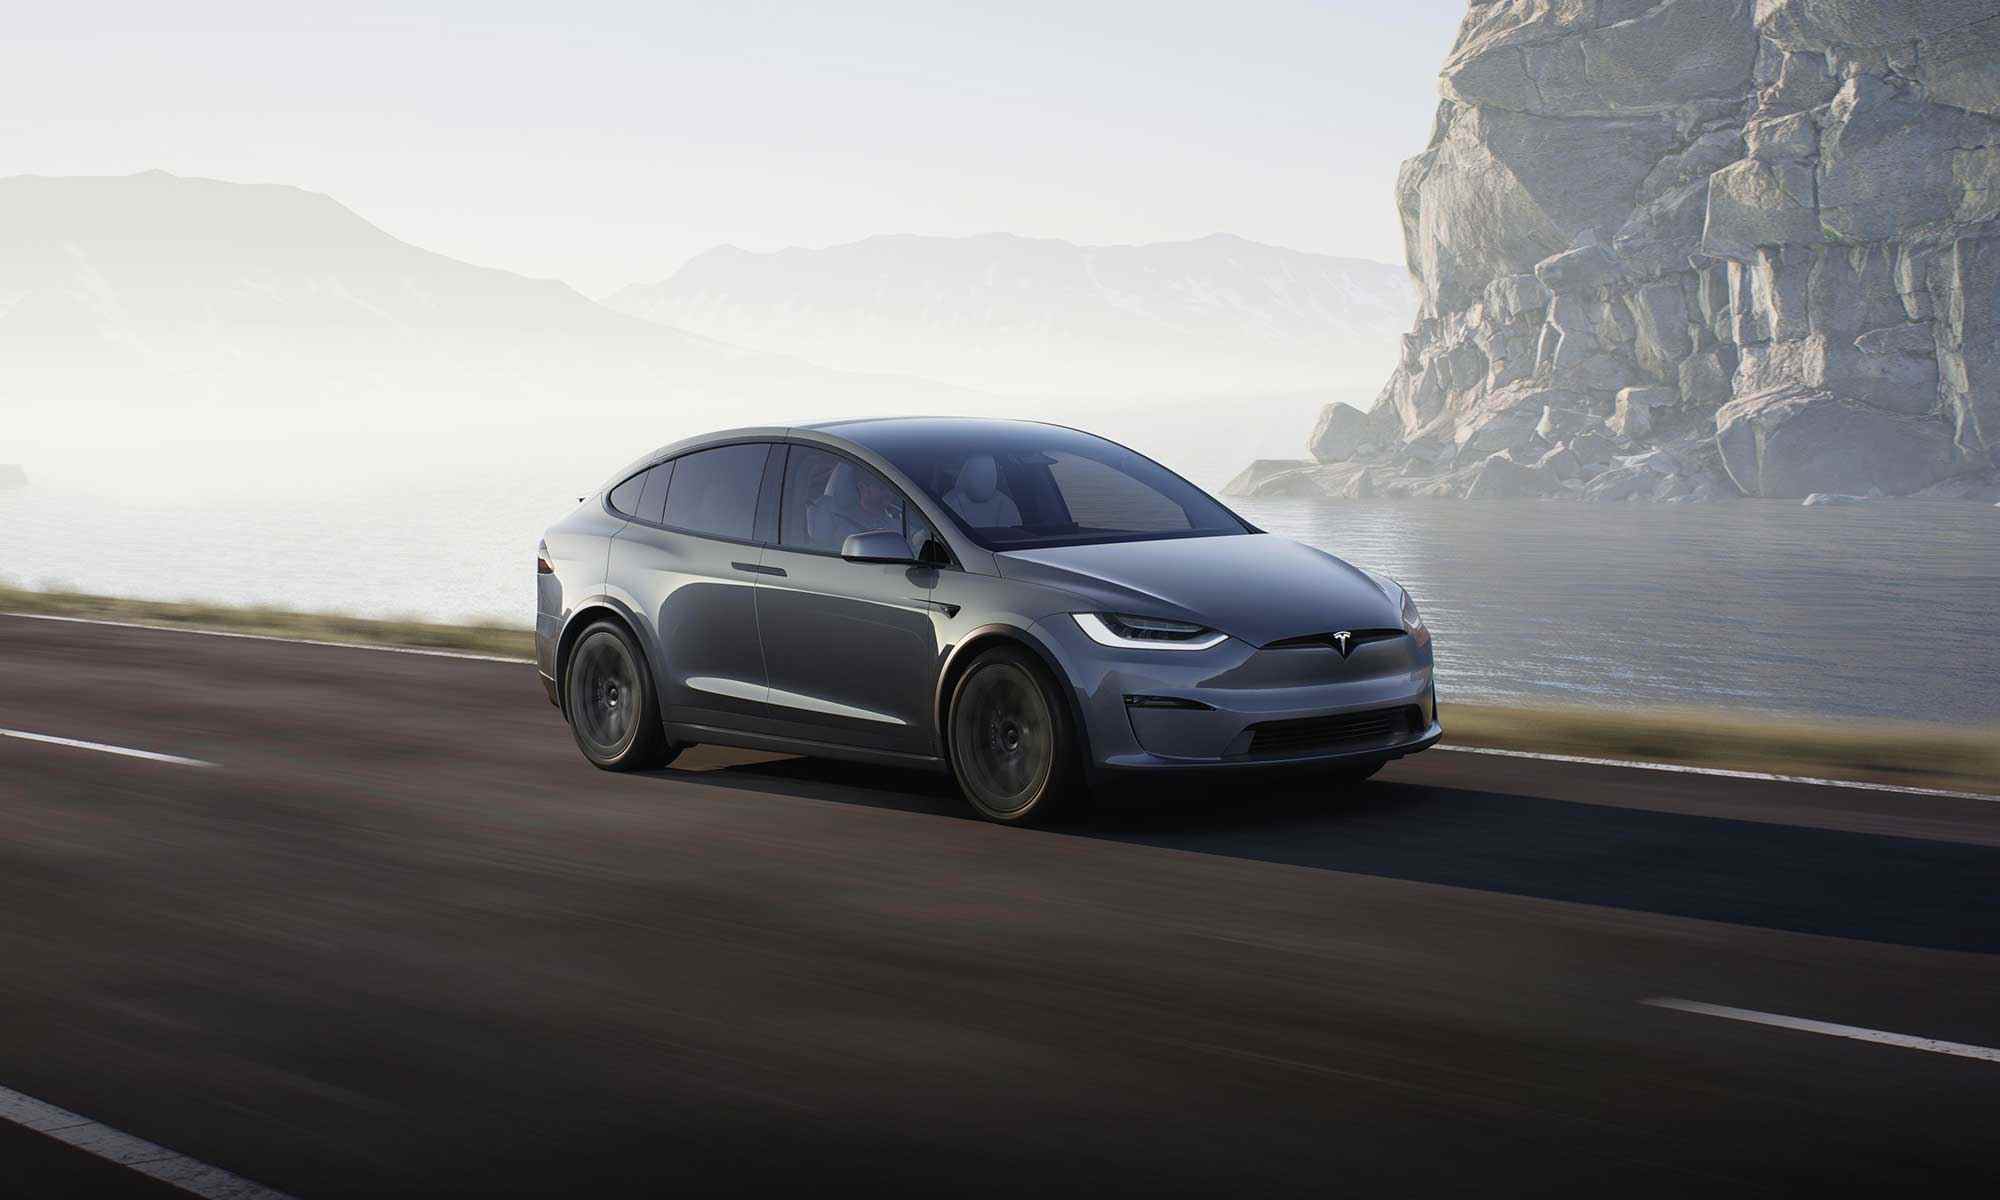 dark grey Tesla model X driving down a country road, past a lake and mountains